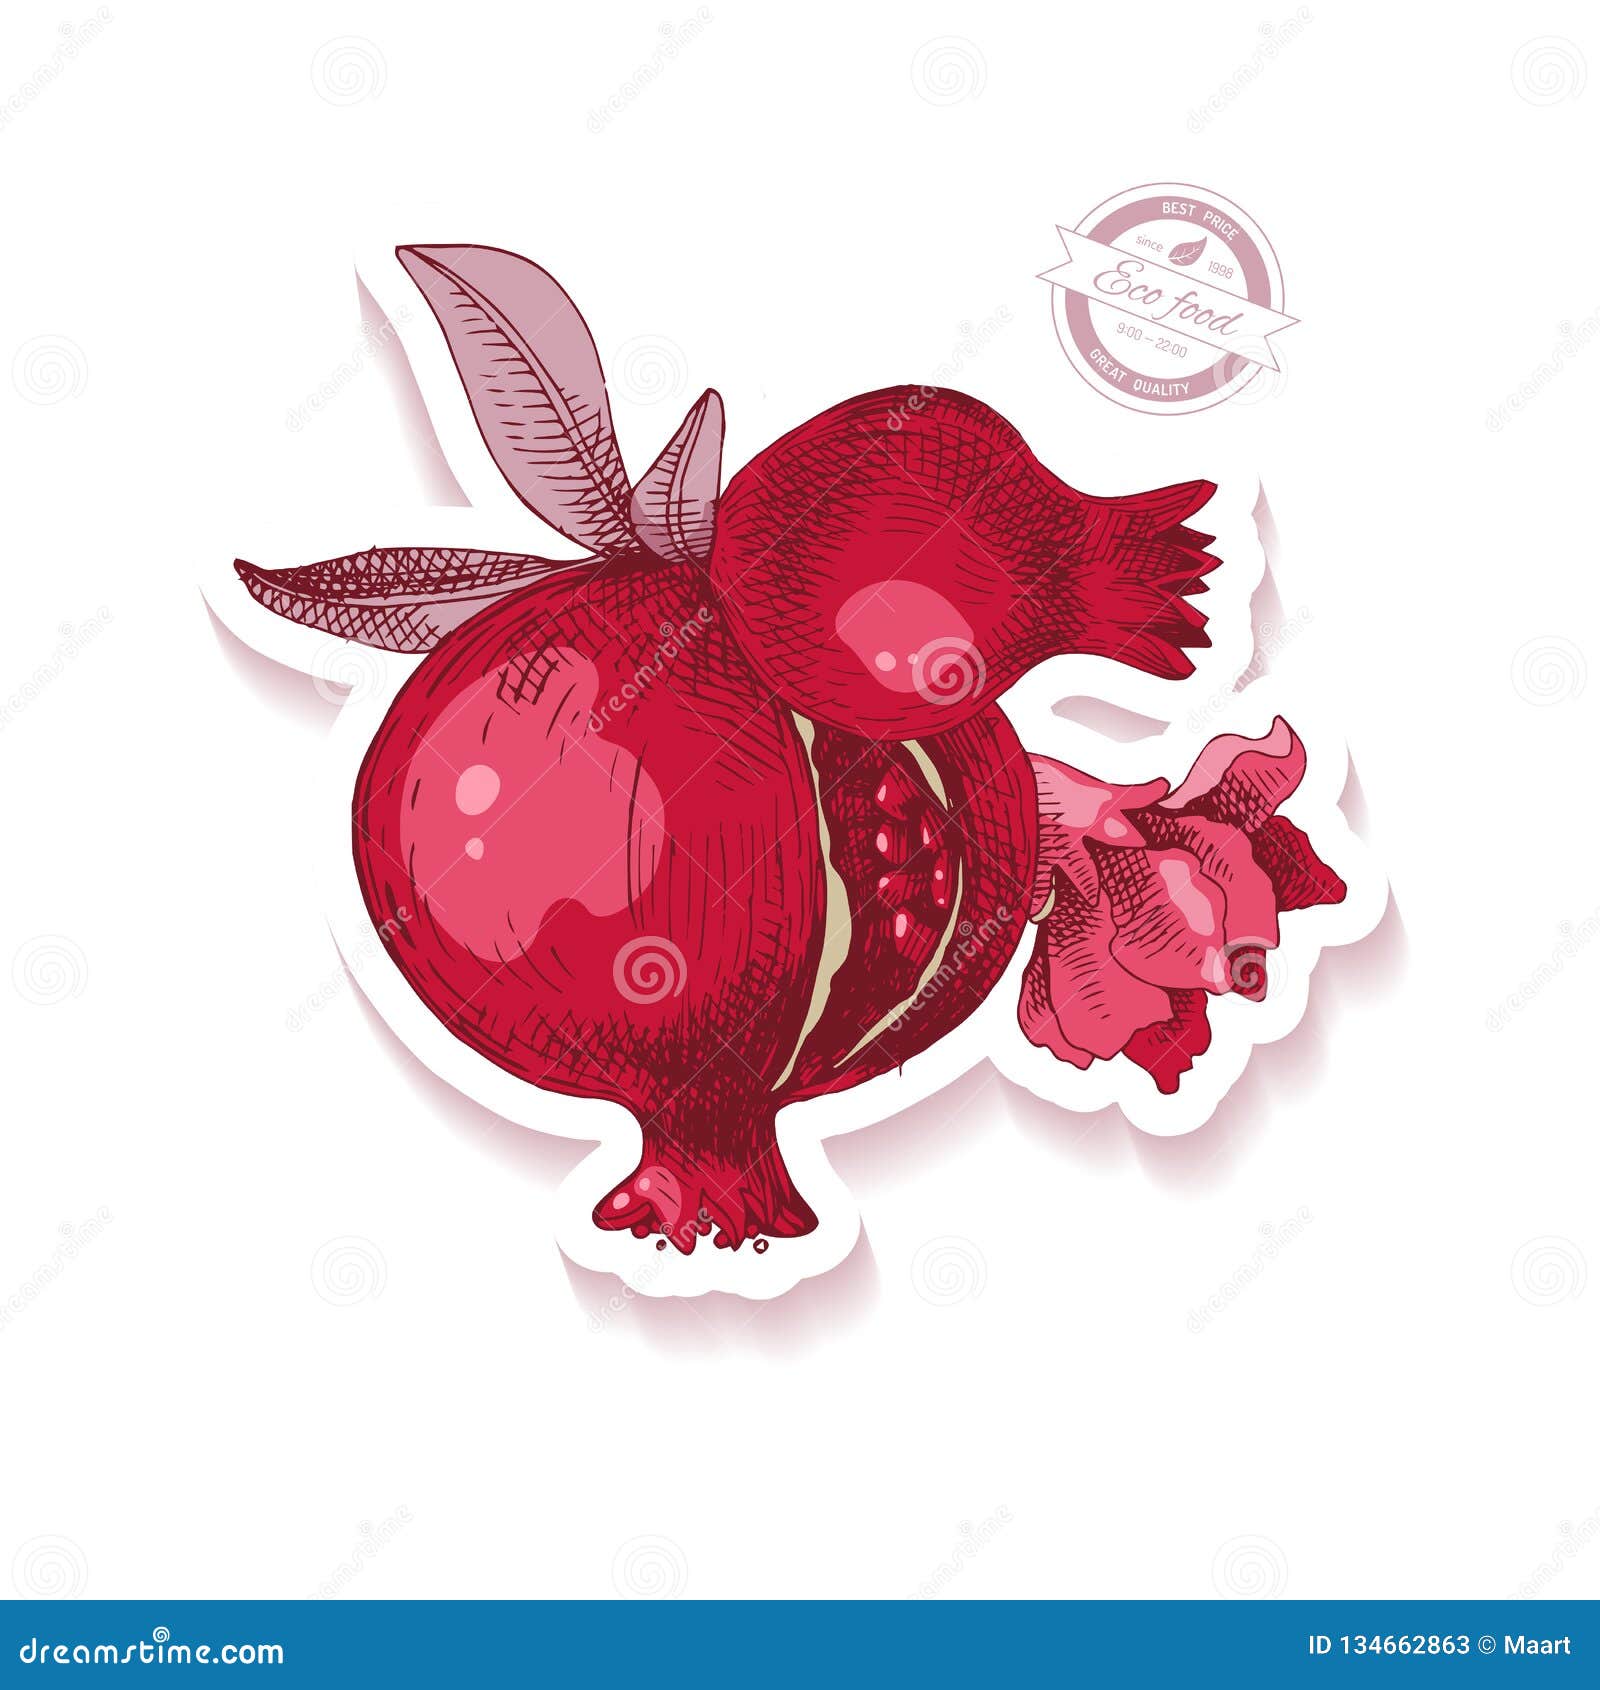 Download Sticker With Hand Drawn Pomegranate Branch Stock Vector ...